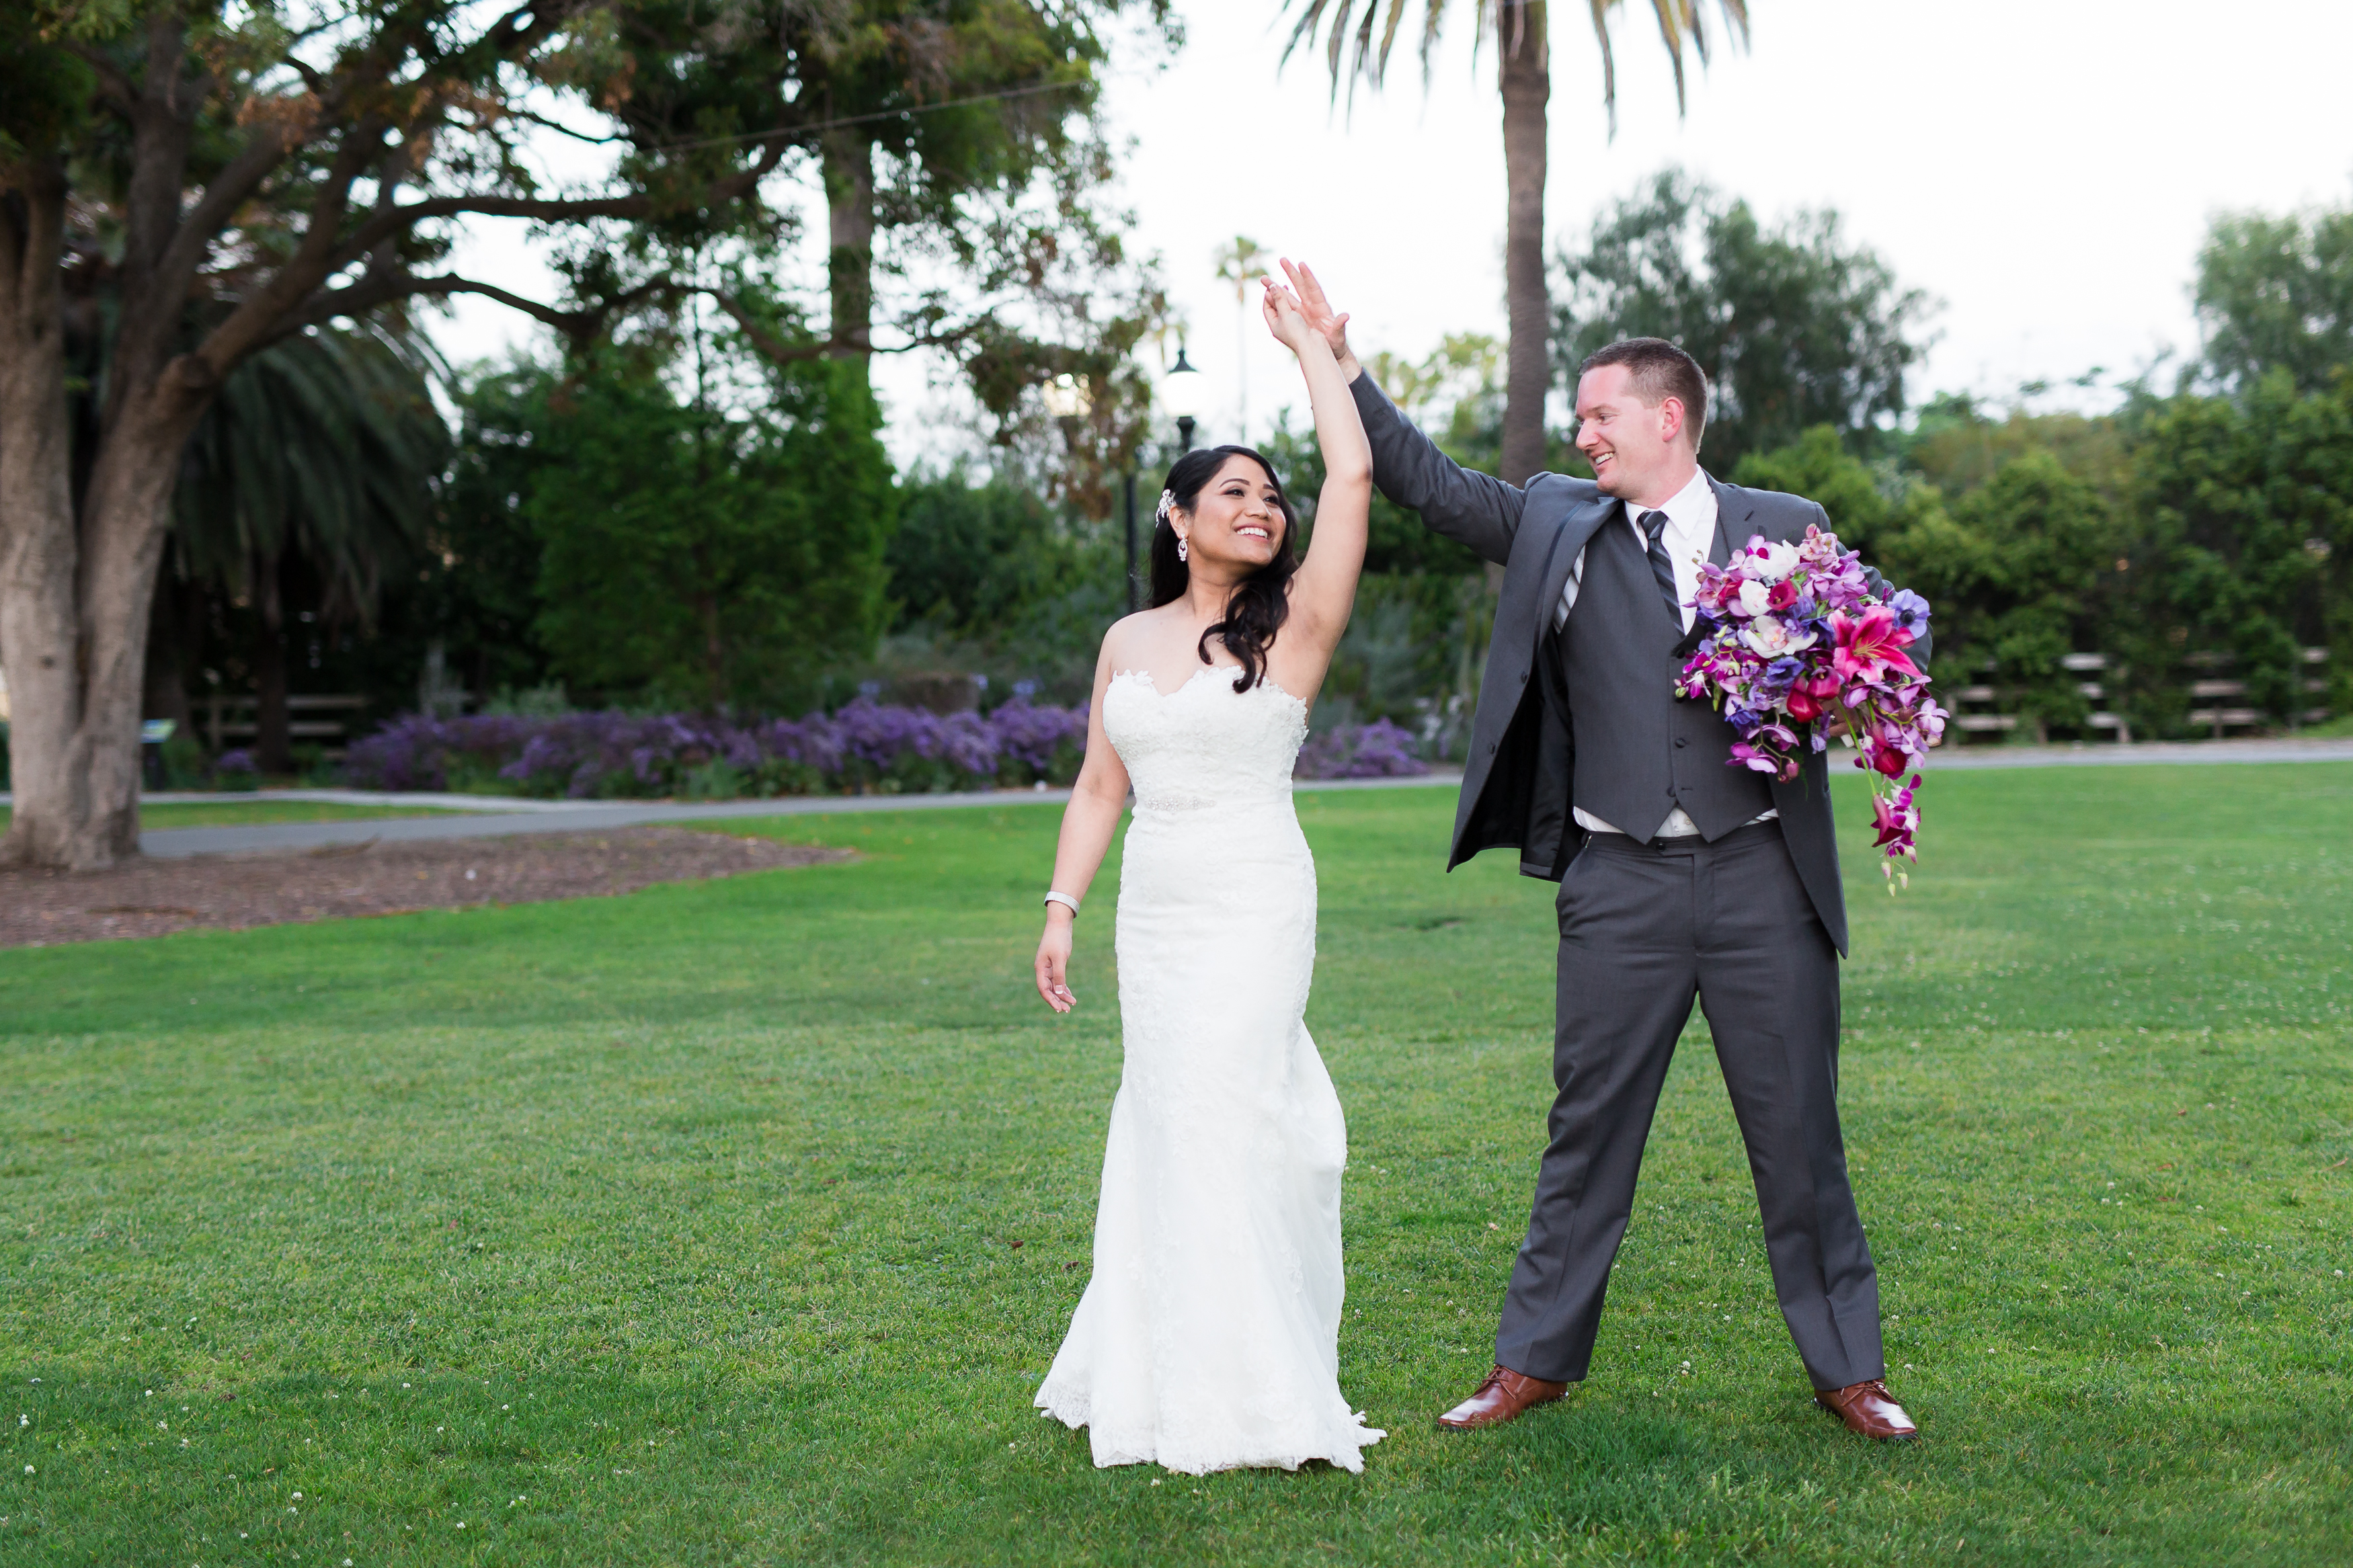 Bride and groom twirl and dance around lawn in California